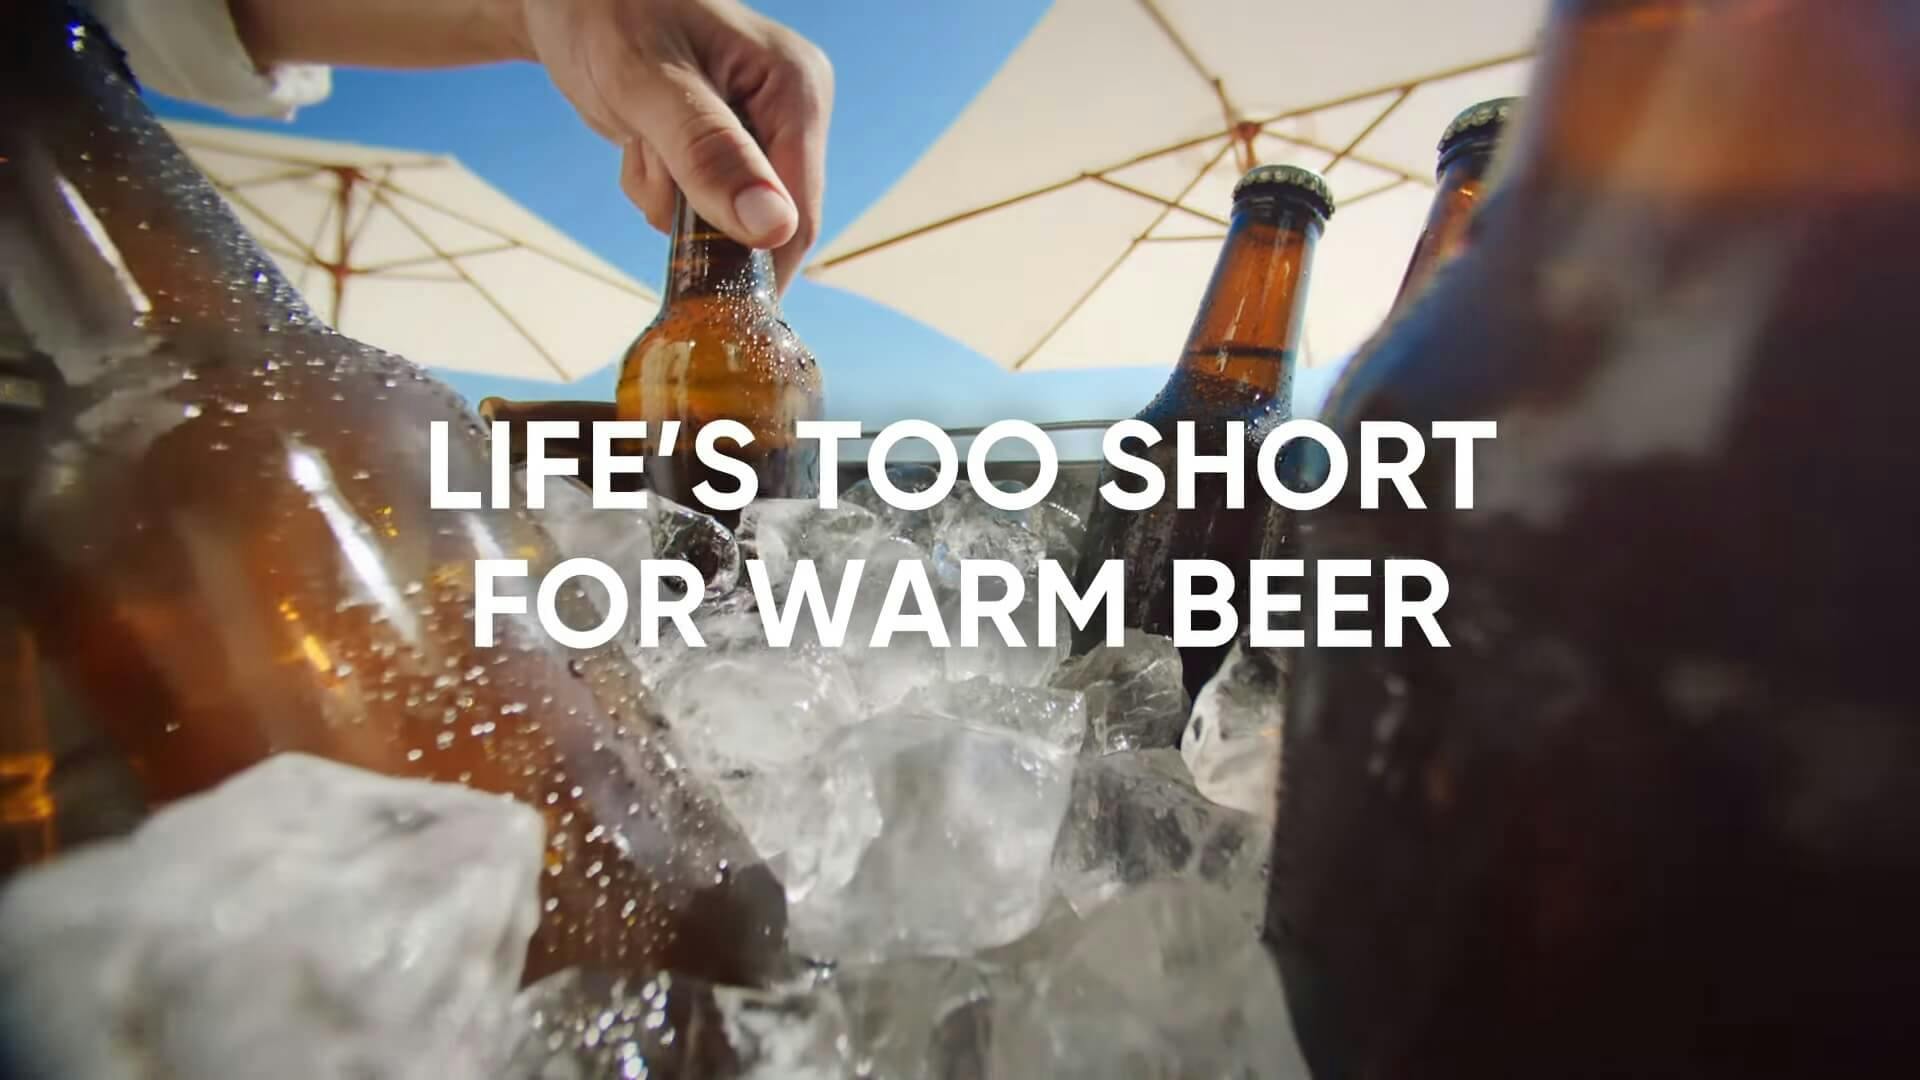 Life's too short for warm beer